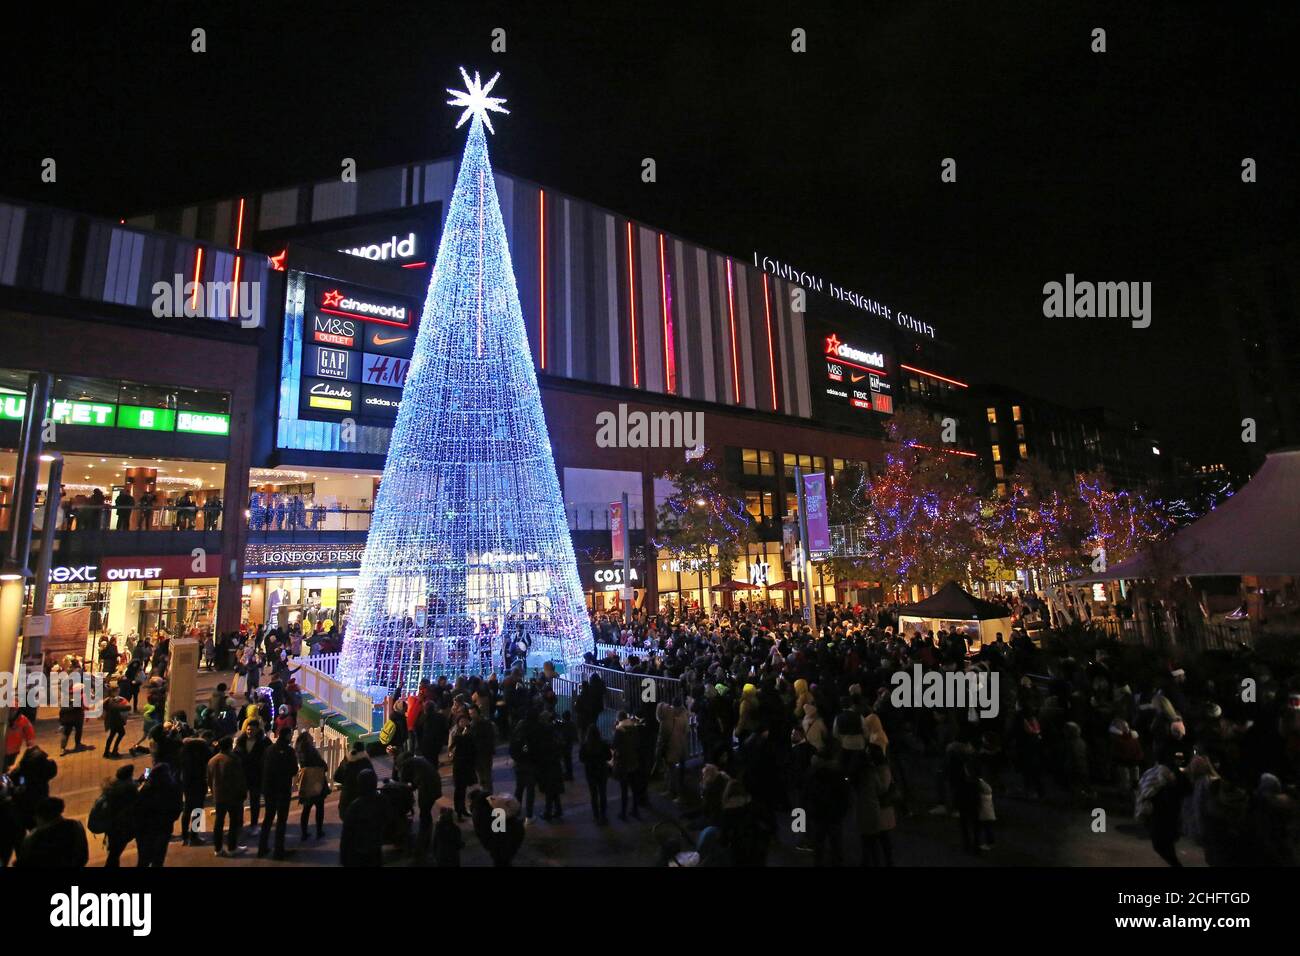 EDITORIAL USE ONLY Crowds gather around 'The Hopeful Tree', which is the tallest LED Christmas tree ever built in London and features 'Murmuration of Hopes' by architectural designer Elyne Legarnisson, at the launch of Wembley Park???s 'Winterfest' Festival in London. Stock Photo